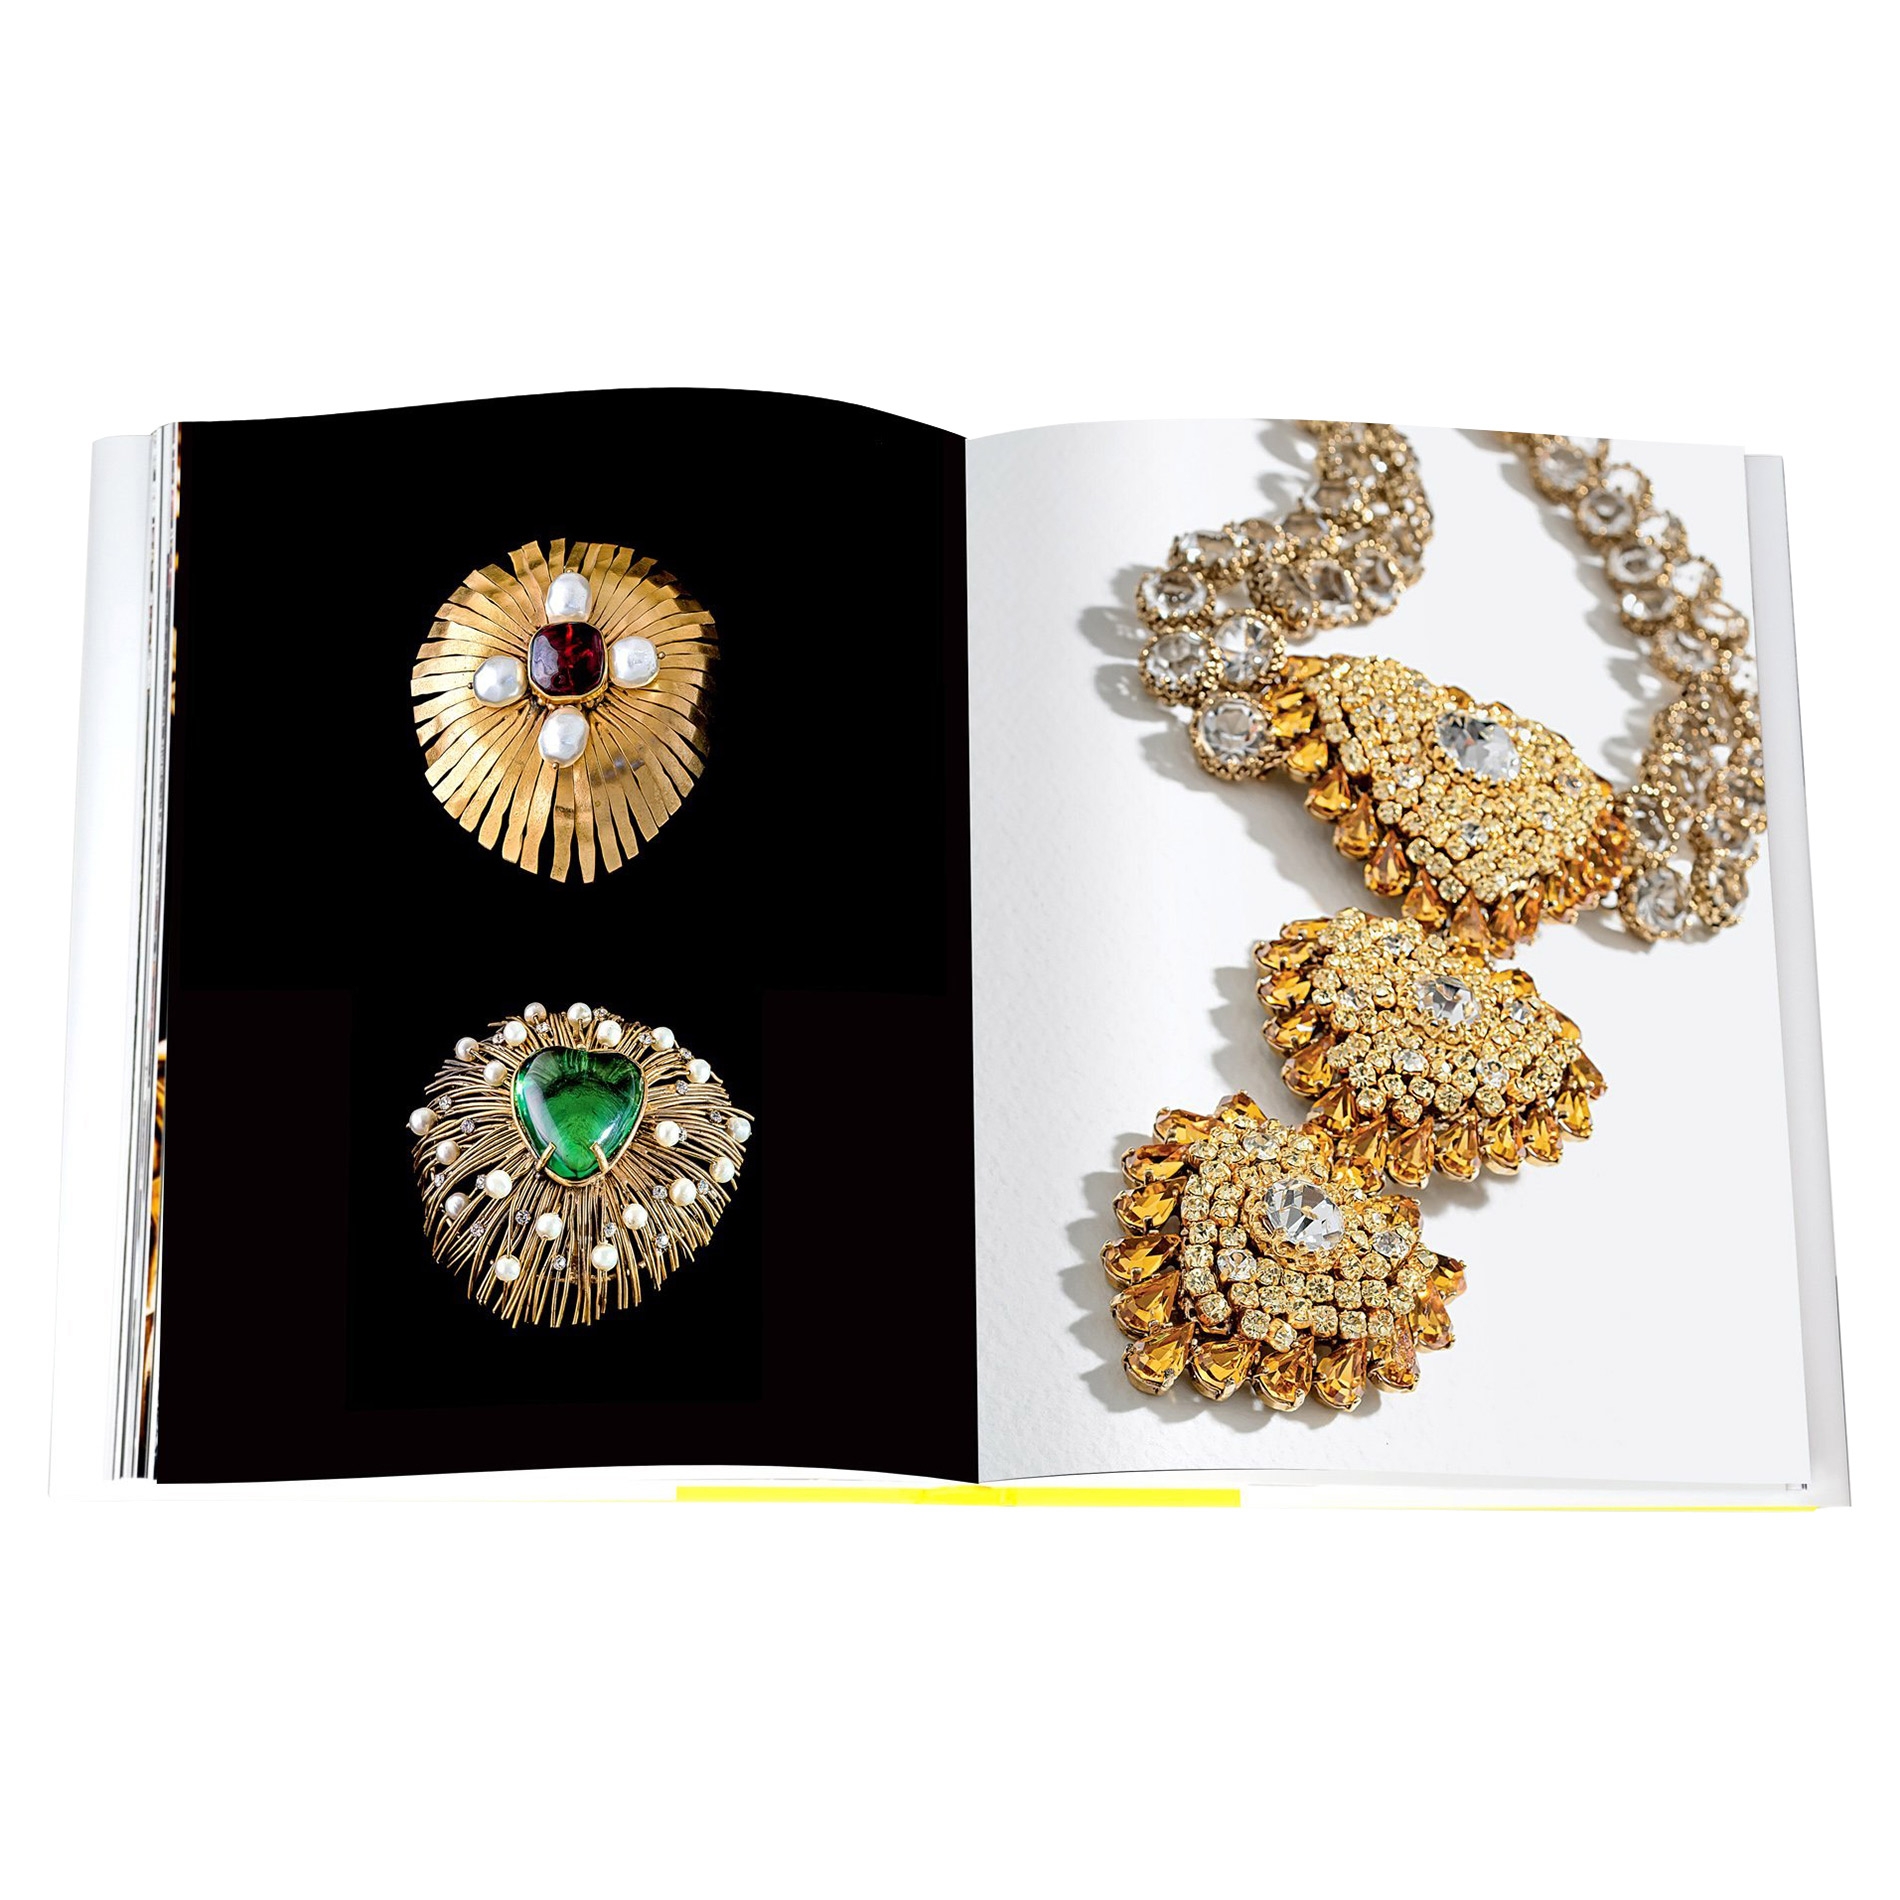 Fashion Jewelry - The Collection of Barbara Berger Assouline Hardcover Book - Image 9